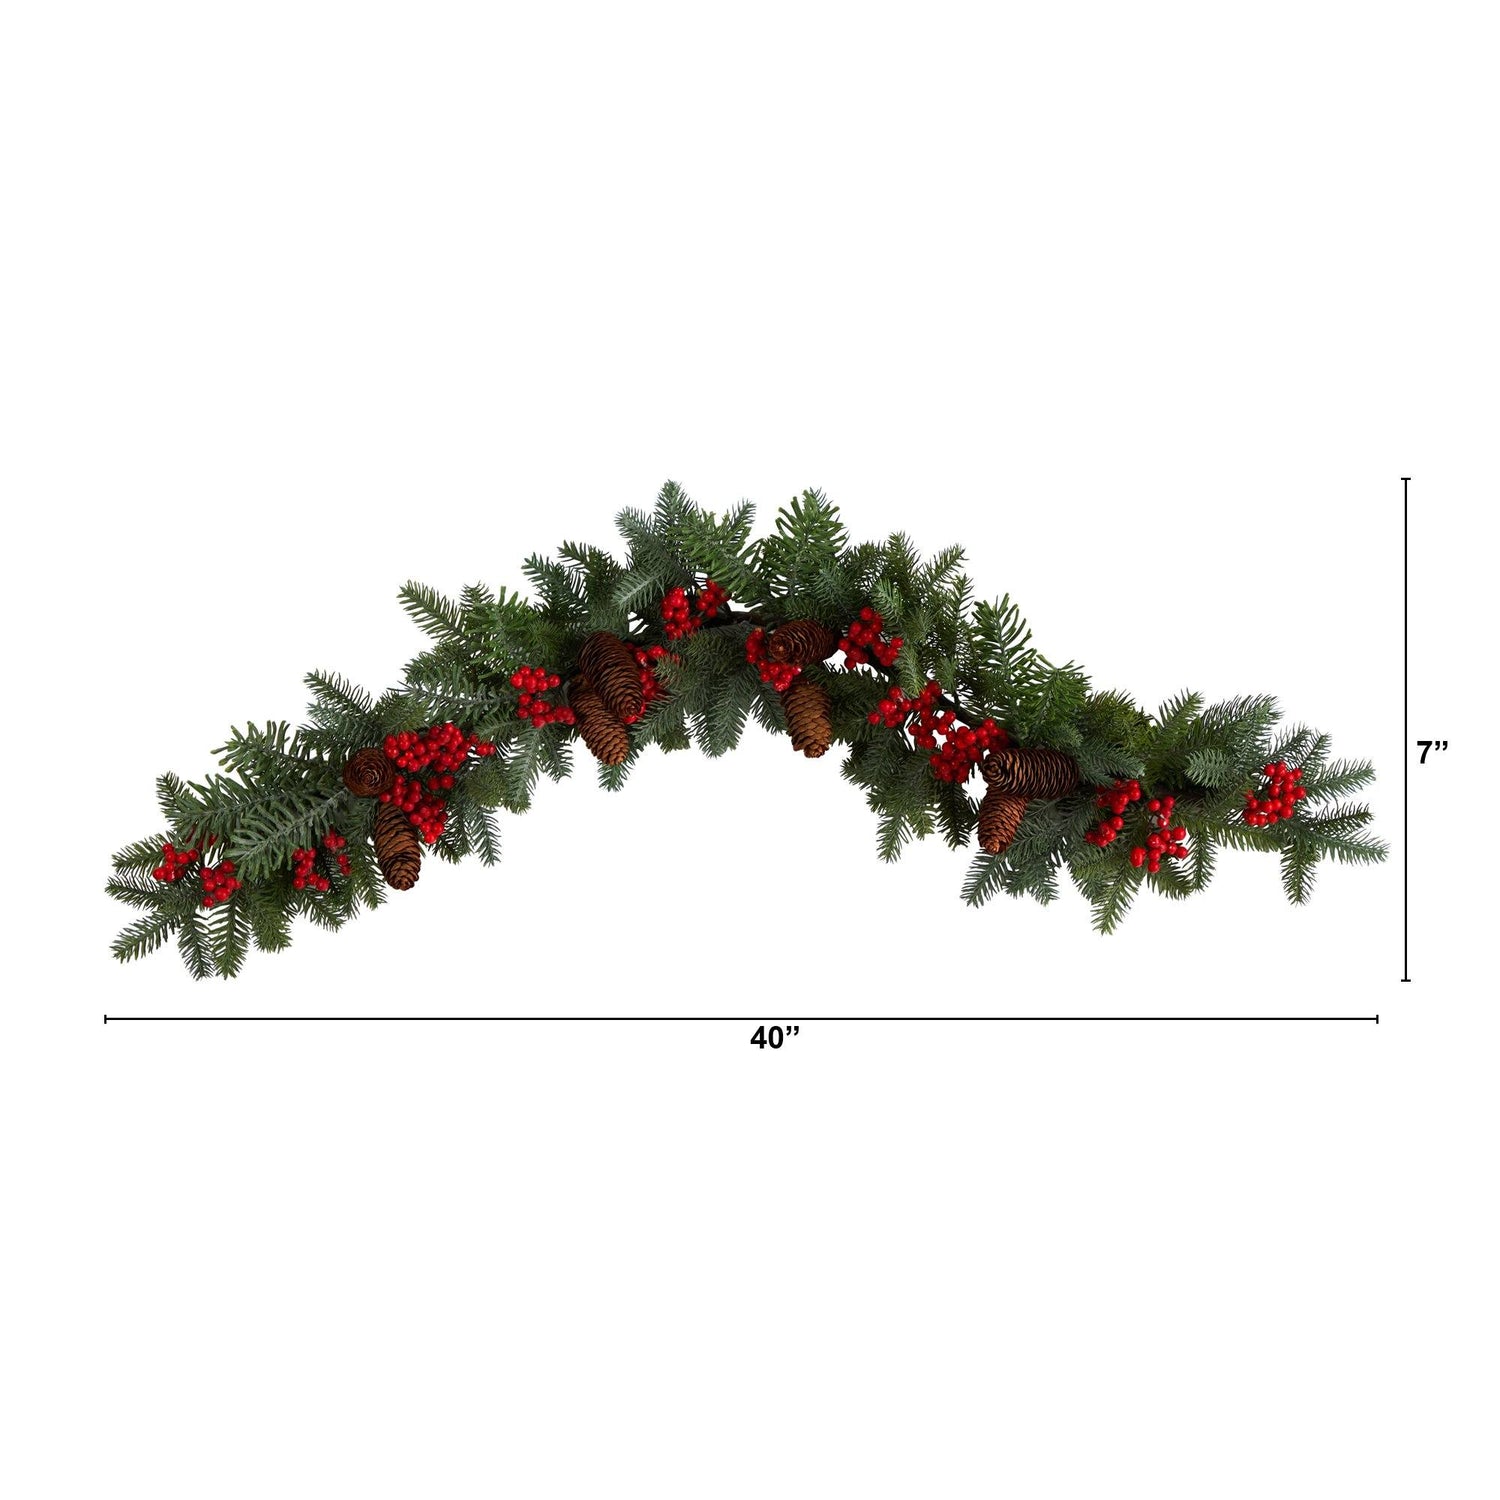 40” Pines, Red Berries and Pinecones Artificial Christmas Garland